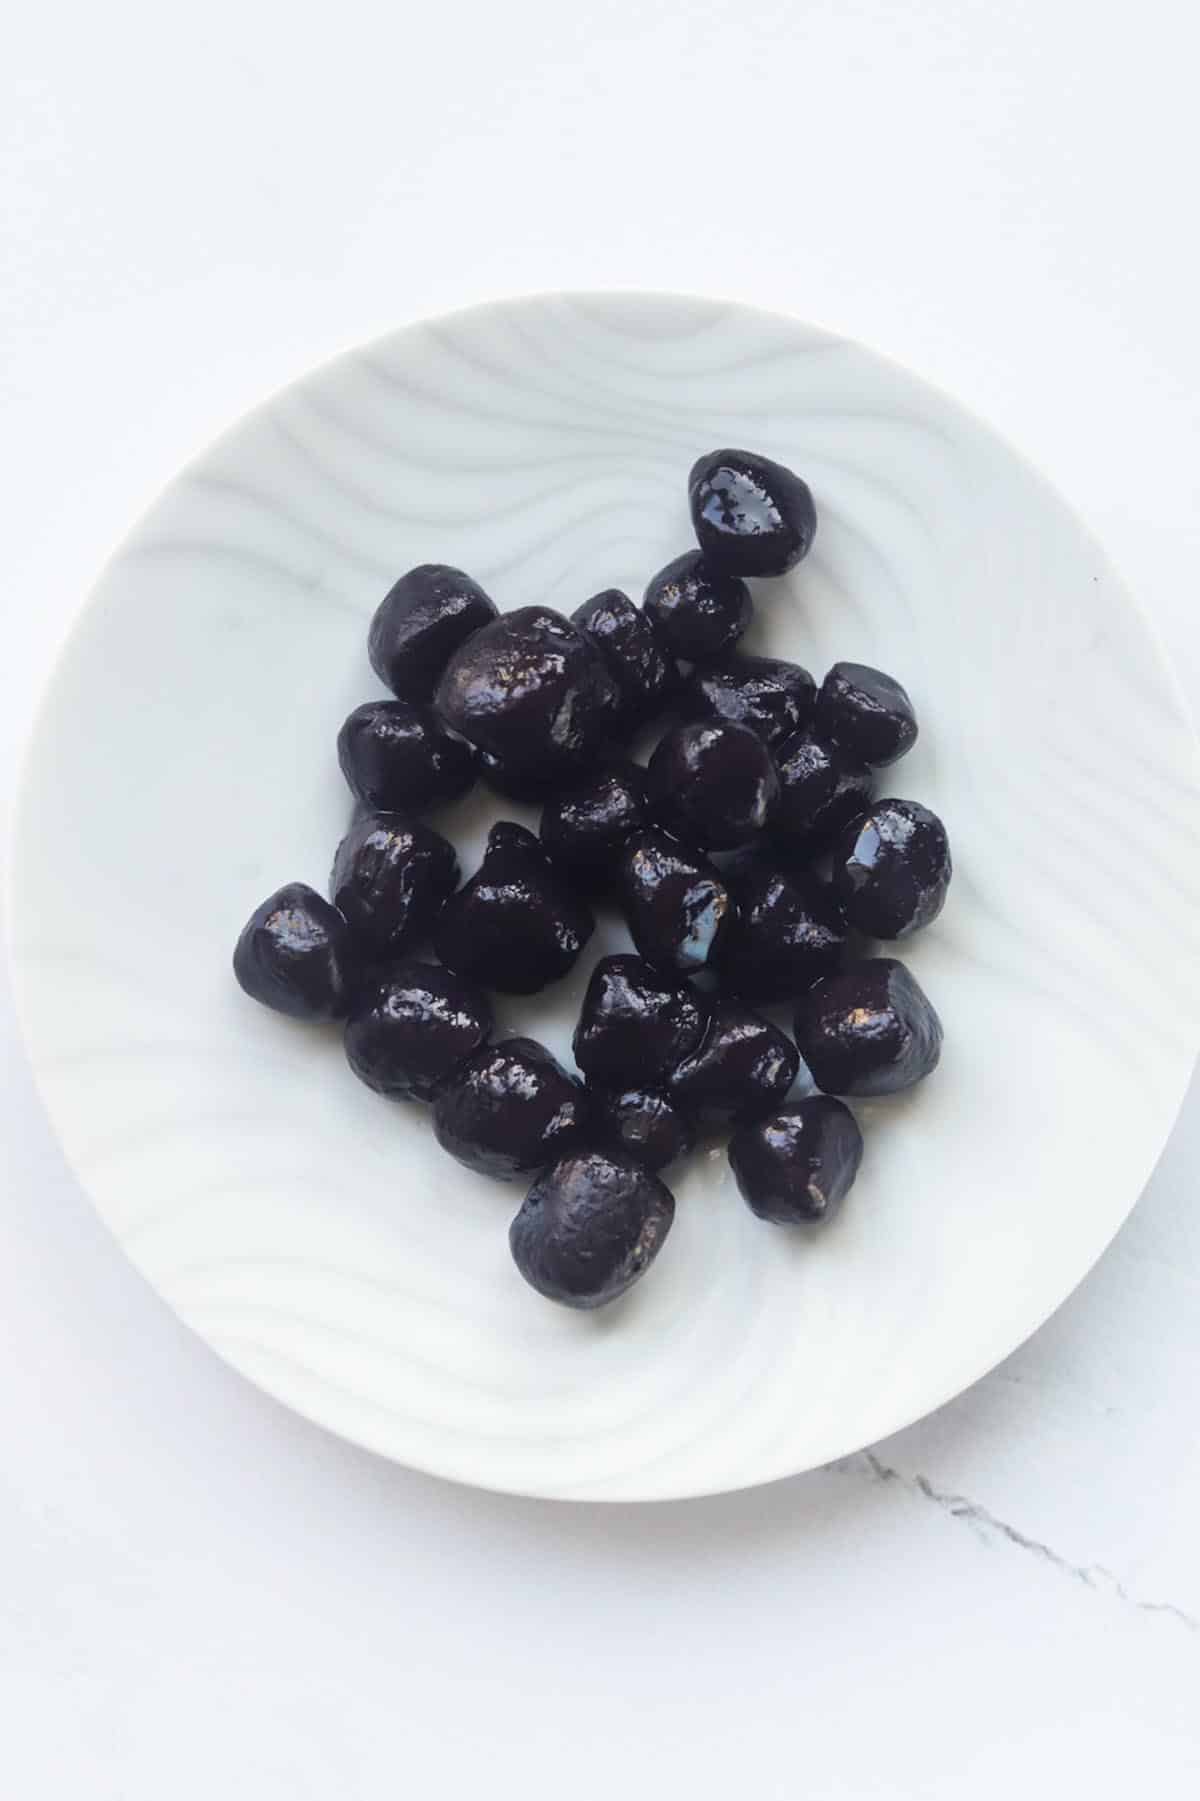 Black tapioca pearls on a white plate.